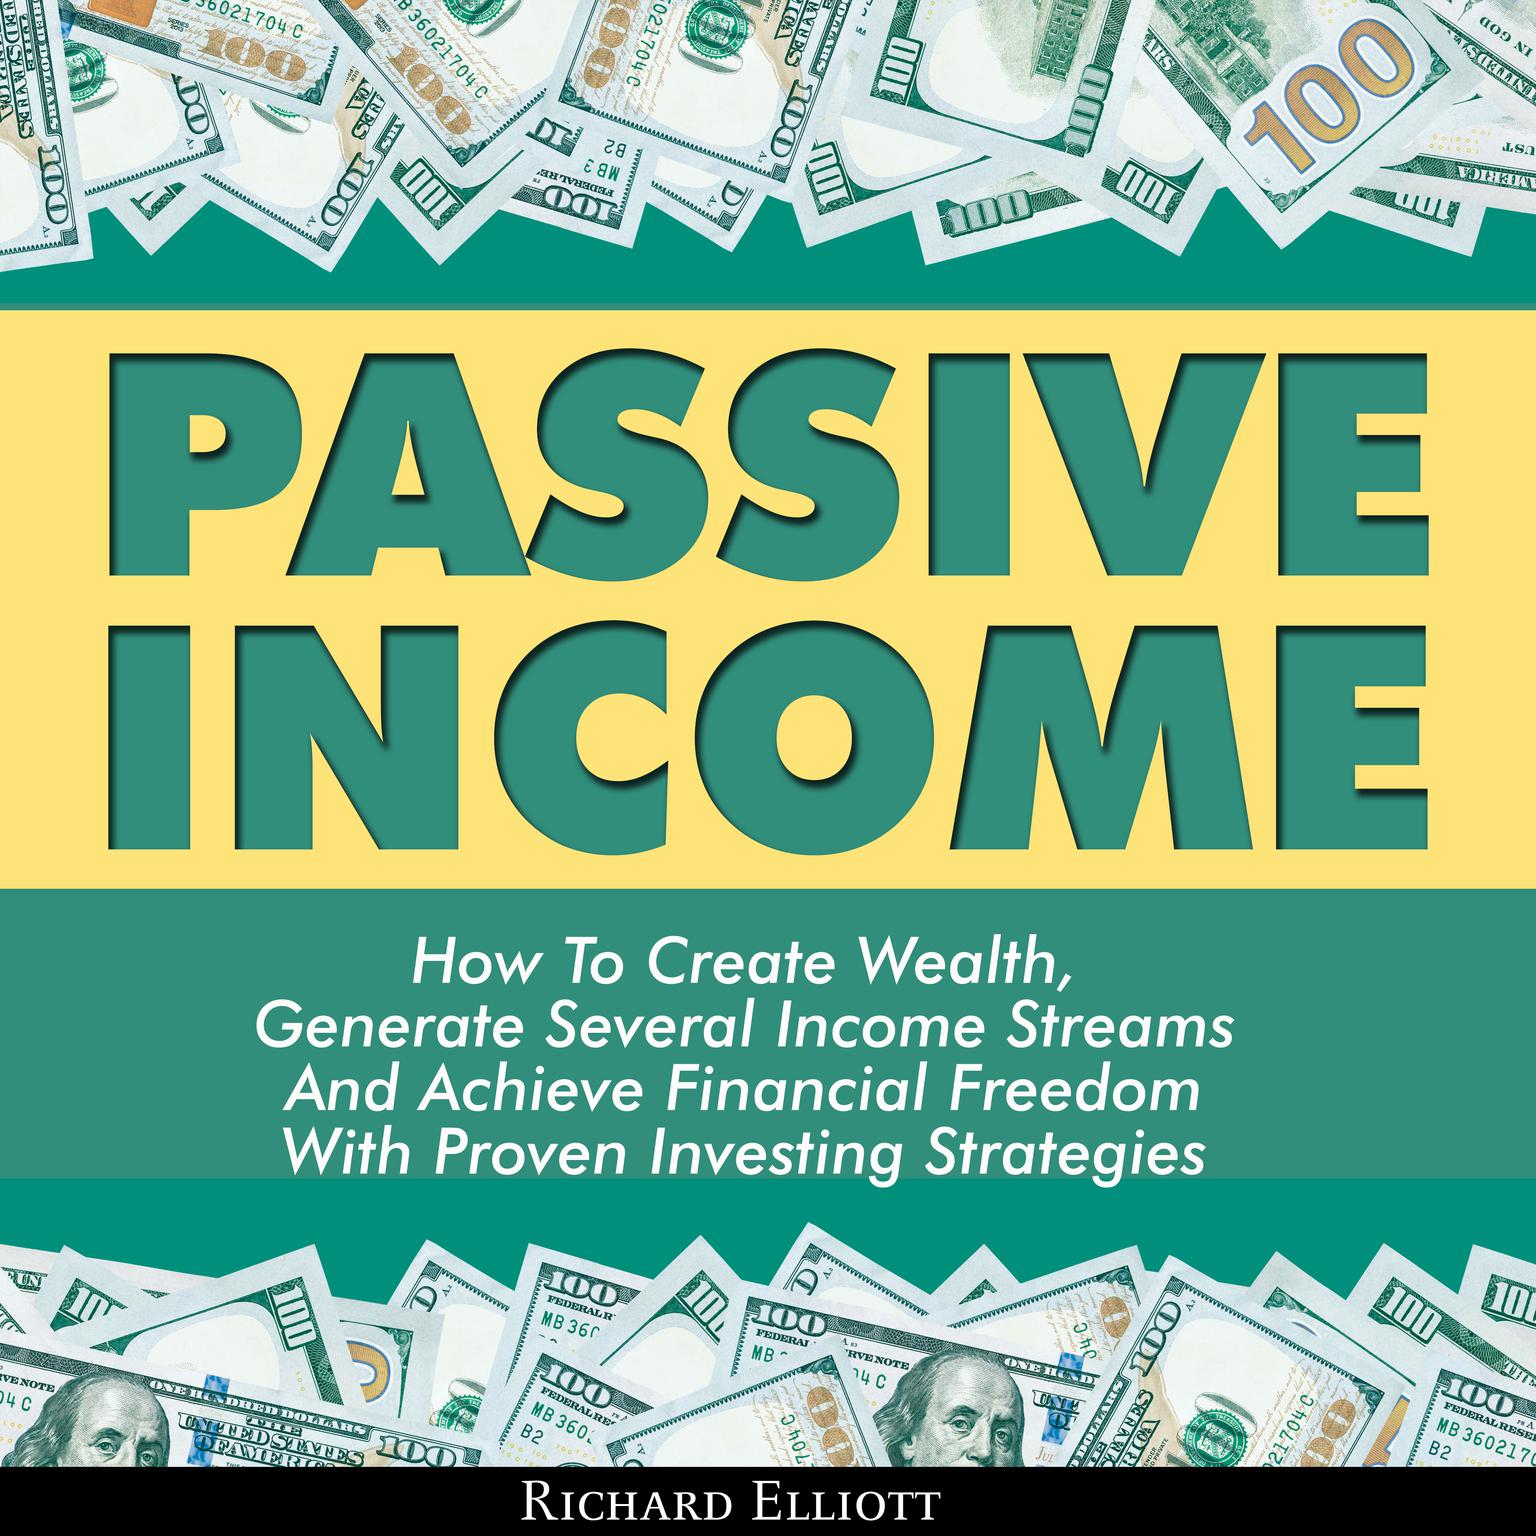 Passive Income: How to Create Wealth, Generate Several Income Streams, and Achieve Financial Freedom With Proven Investing Strategies Audiobook, by Richard Elliott